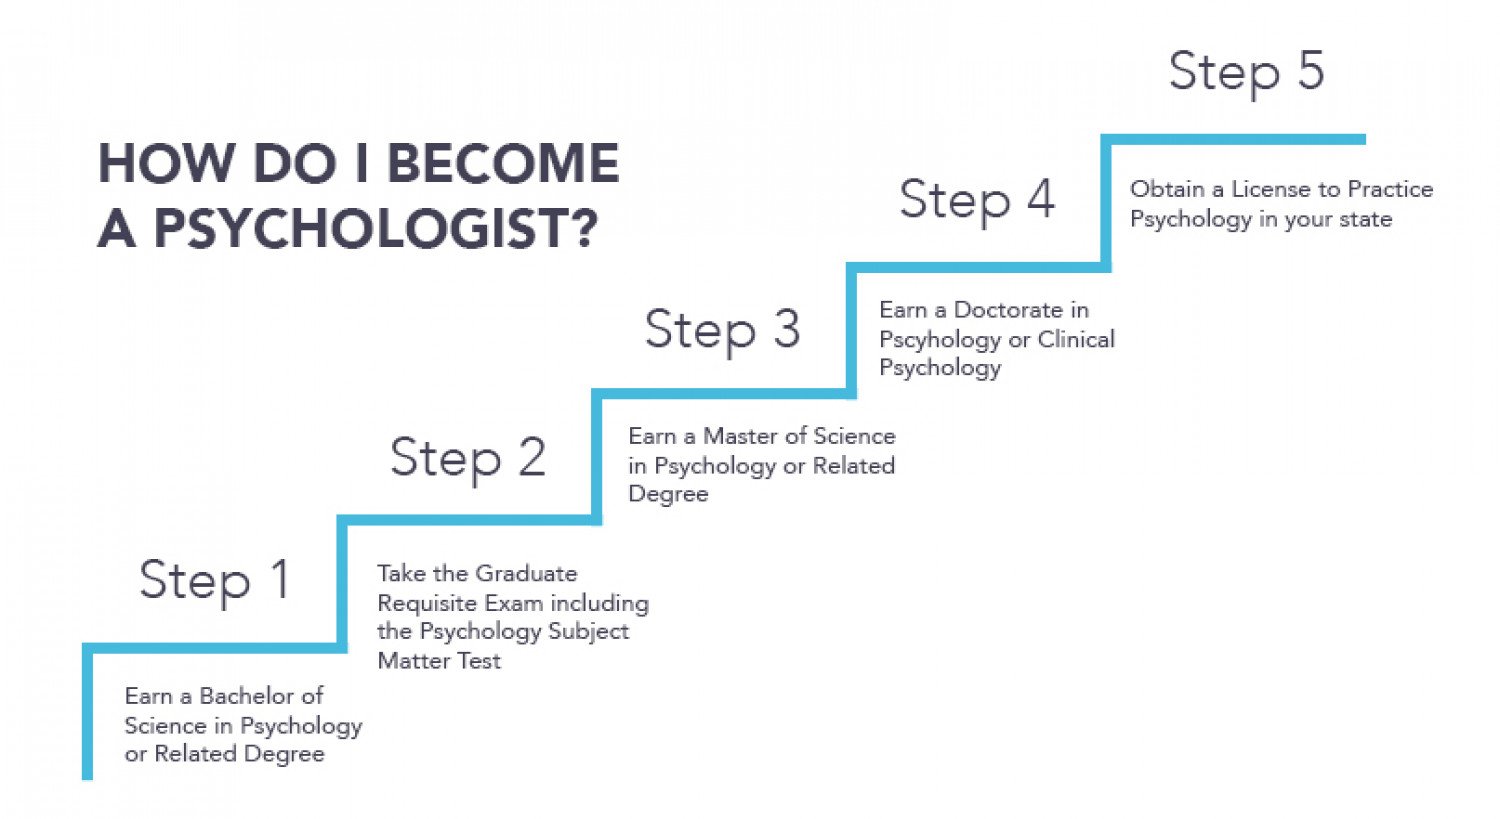 How to Become a Psychologist